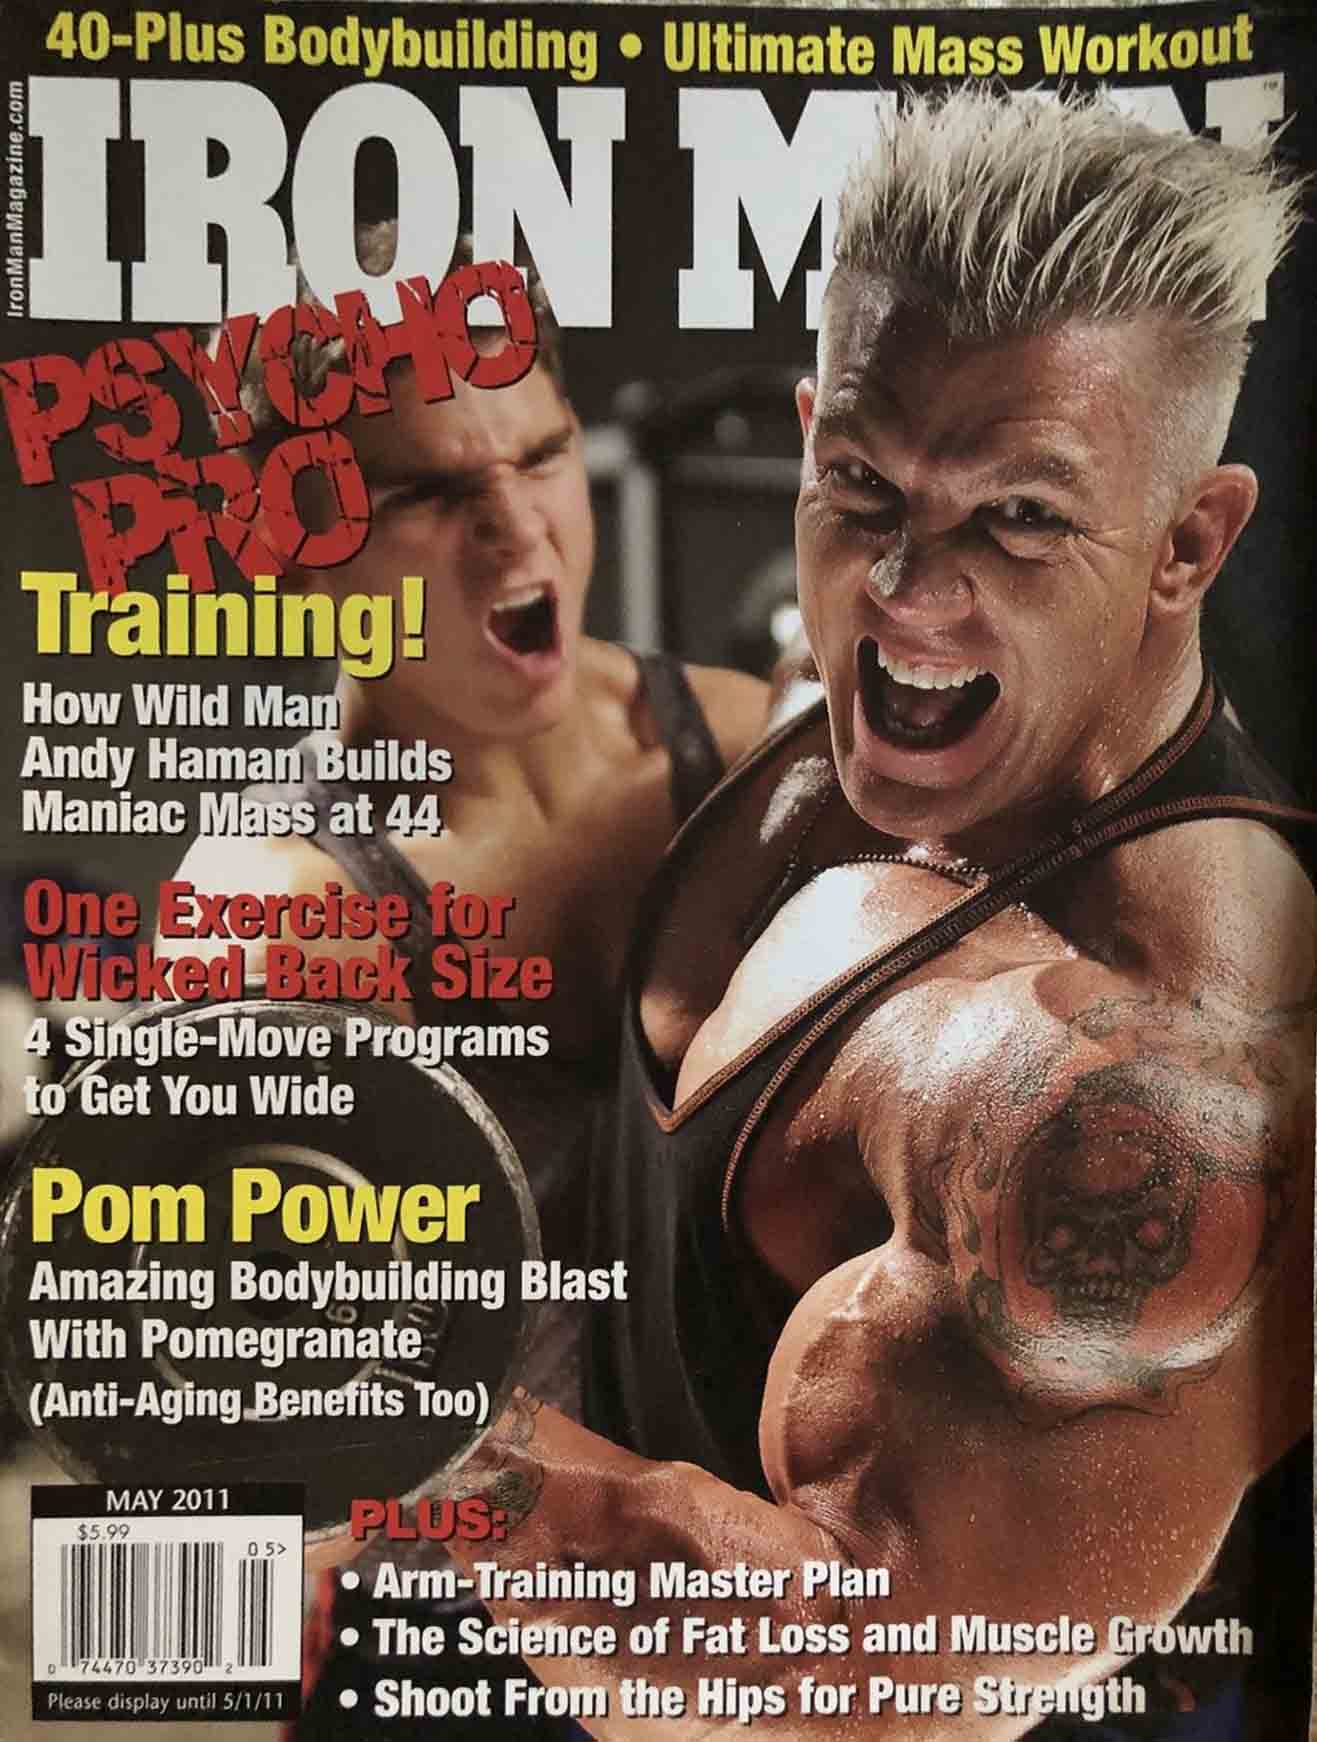 Ironman May 2011 magazine back issue Ironman magizine back copy Ironman May 2011 American magazine Back Issue about bodybuilding, weightlifting, and powerlifting. Published by Iron Man Publishing. 40-Plus Bodybuilding - Ultimate Mass Workout.